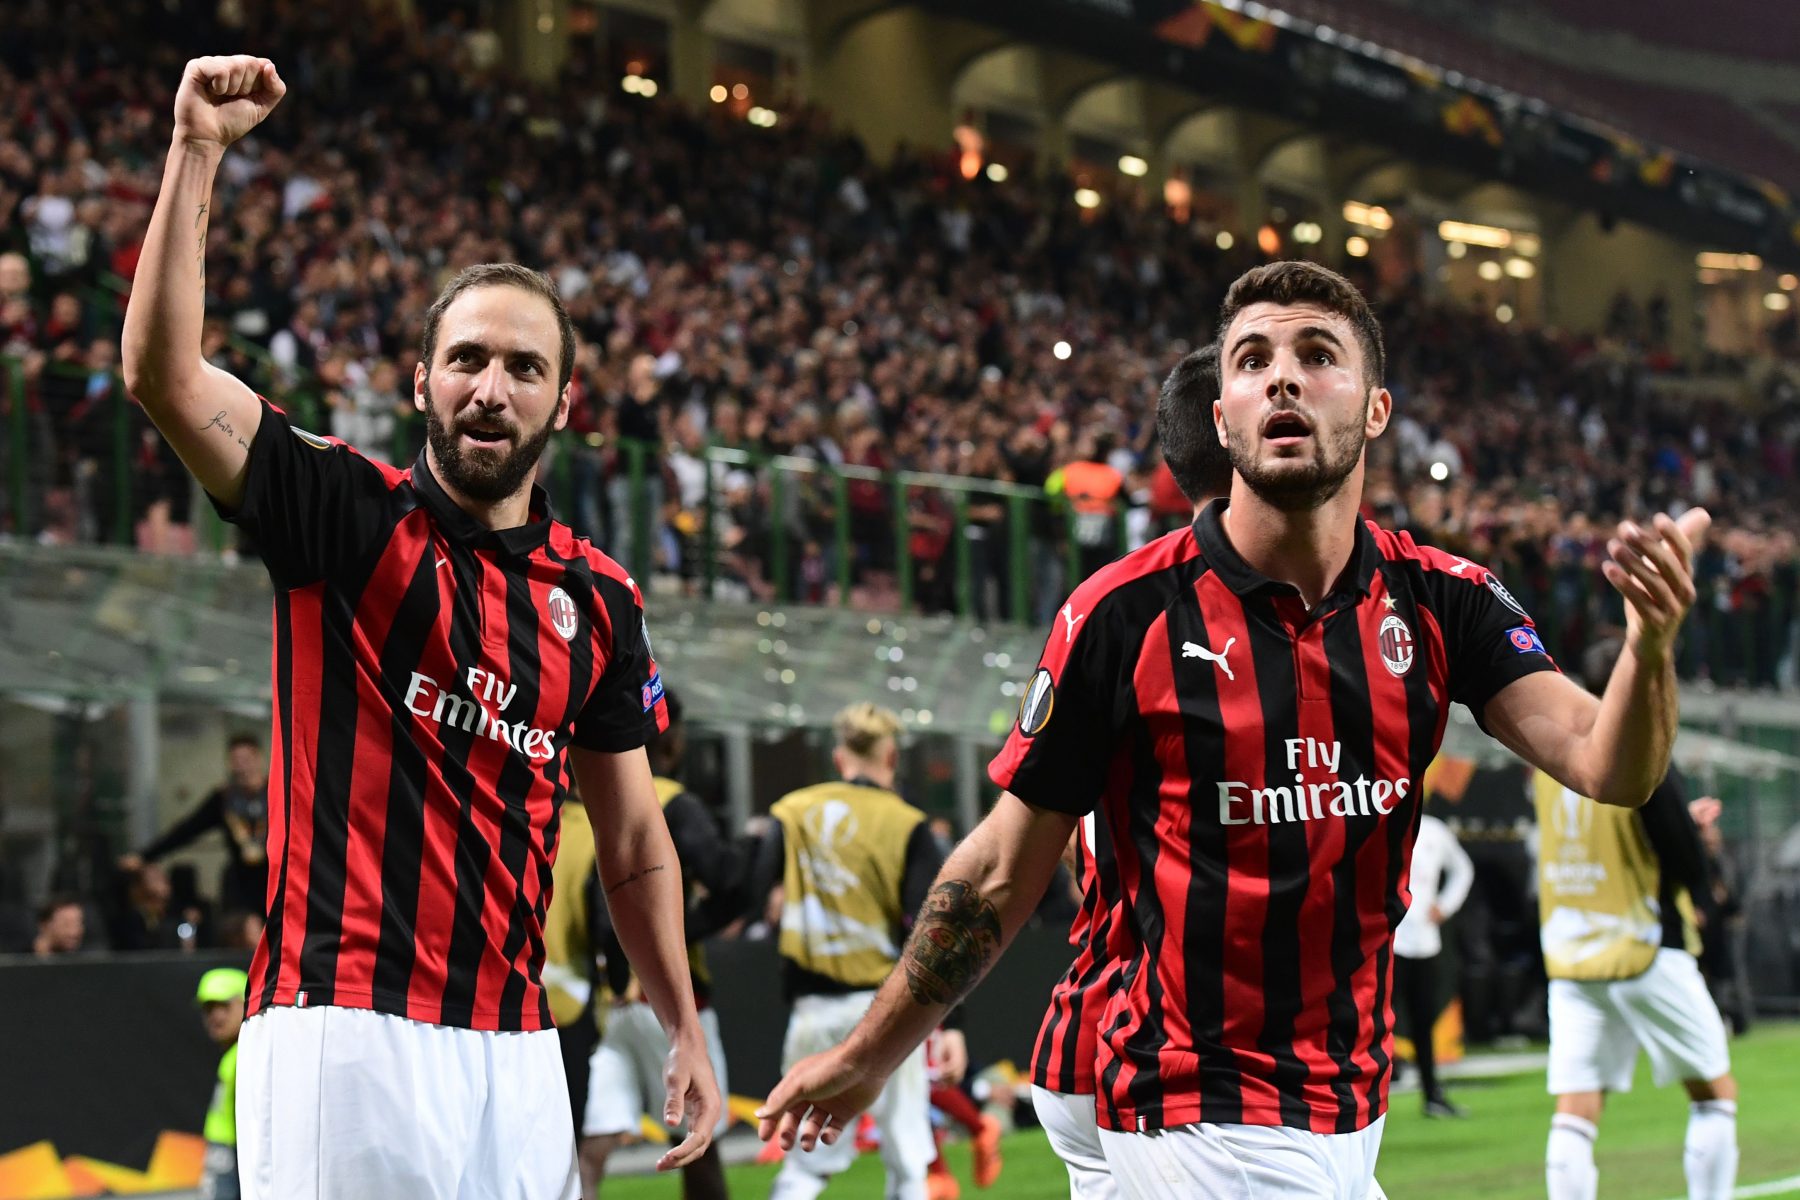 AC Milan's Argentine forward Gonzalo Higuain (L) and AC Milan's Italian forward Patrick Cutrone celebrate after Higuain scored during the Europa League Group F football match between AC Milan and Olympiakos at the San Siro stadium on October 4, 2018 in Milan. (Photo by Miguel MEDINA / AFP) (Photo credit should read MIGUEL MEDINA/AFP/Getty Images)